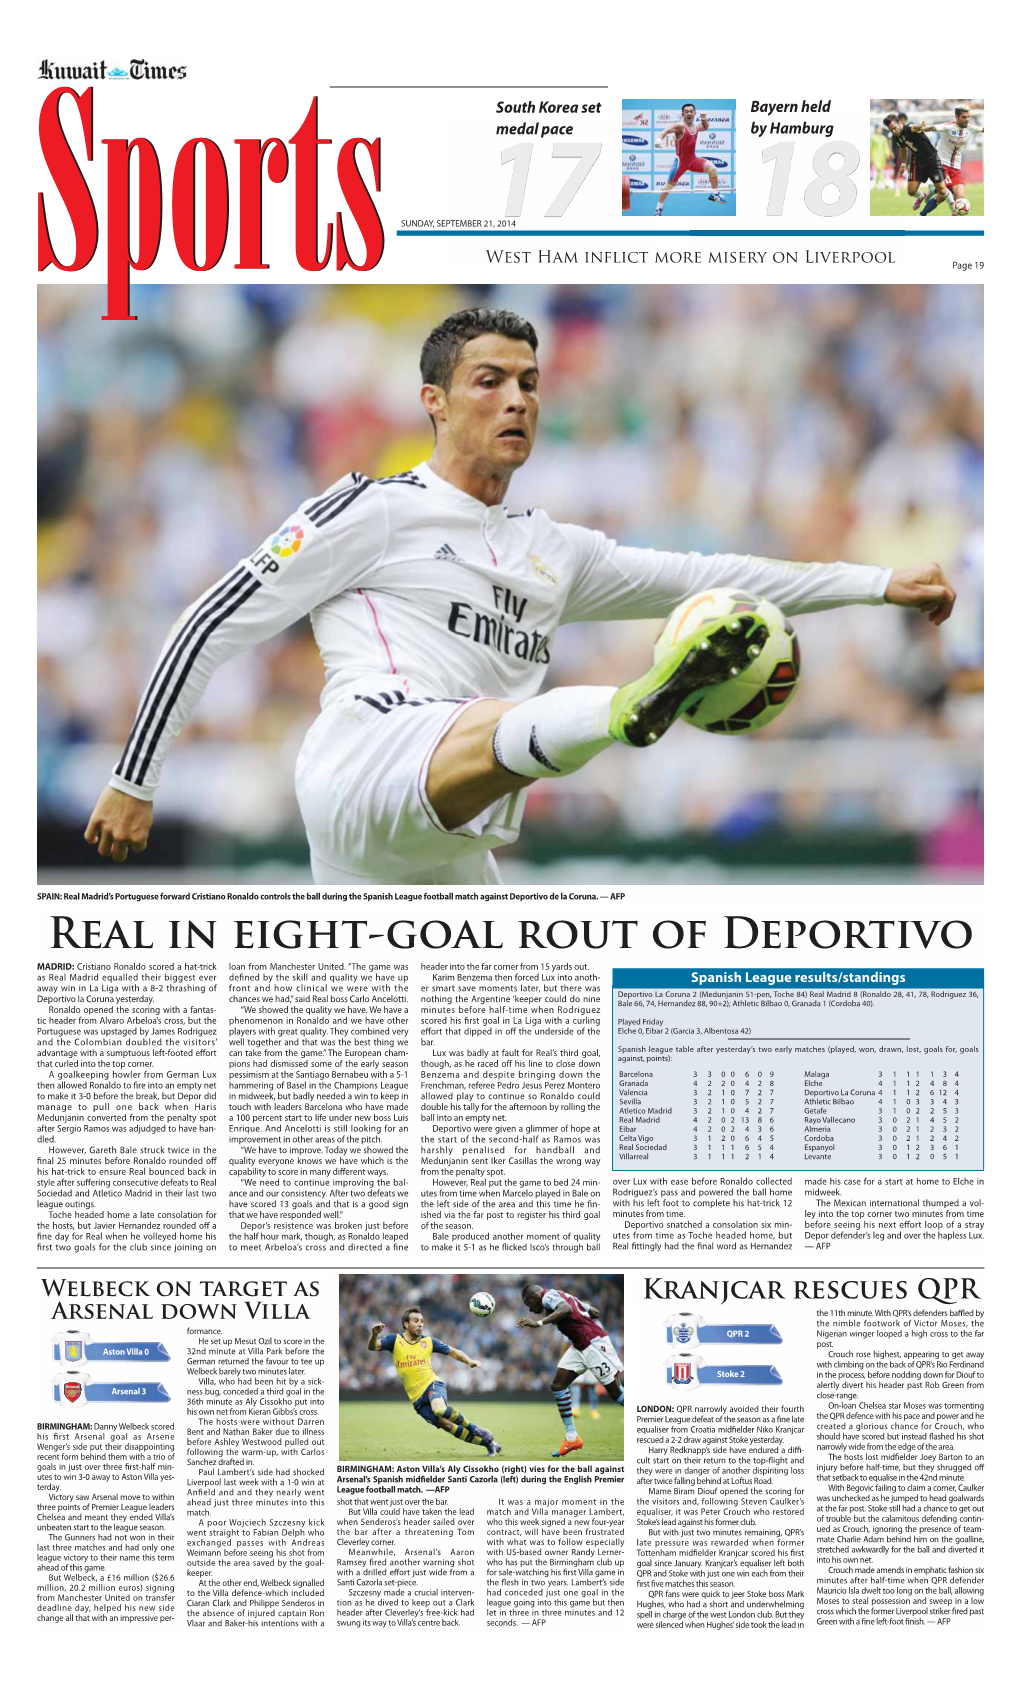 Real in Eight-Goal Rout of Deportivo